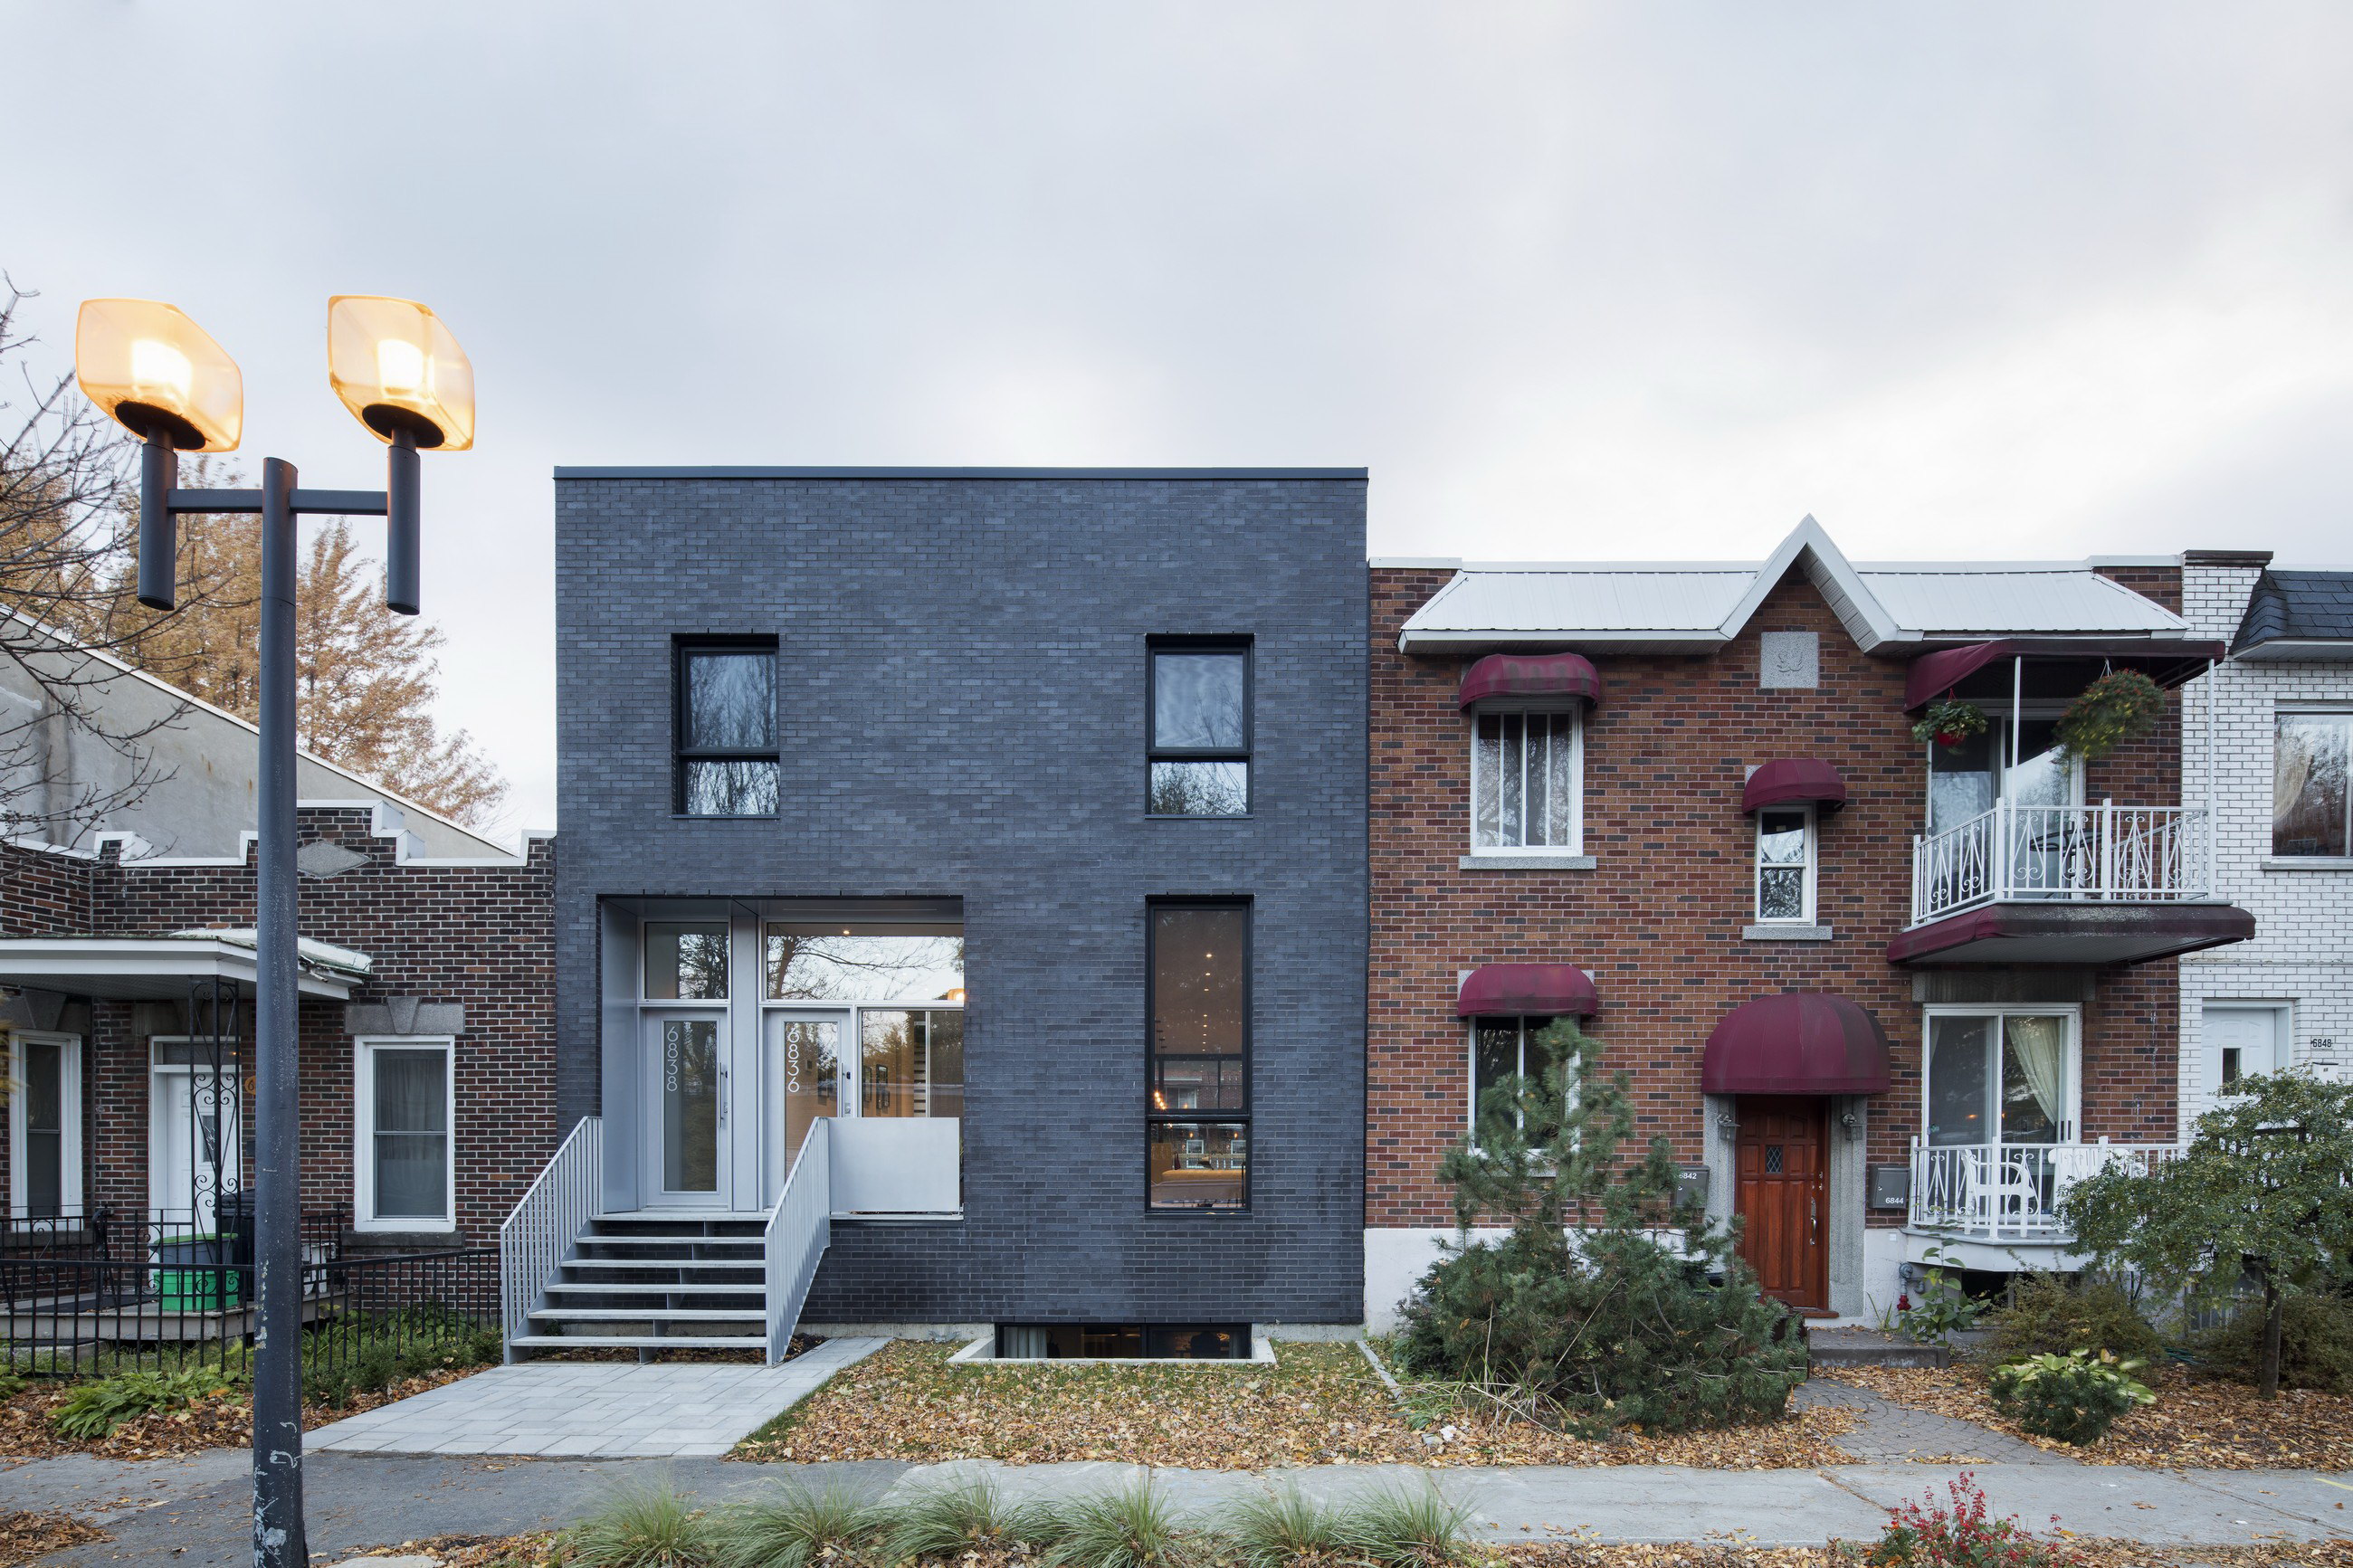 1st Avenue Residence – Terraced House Renovation by Microclimat